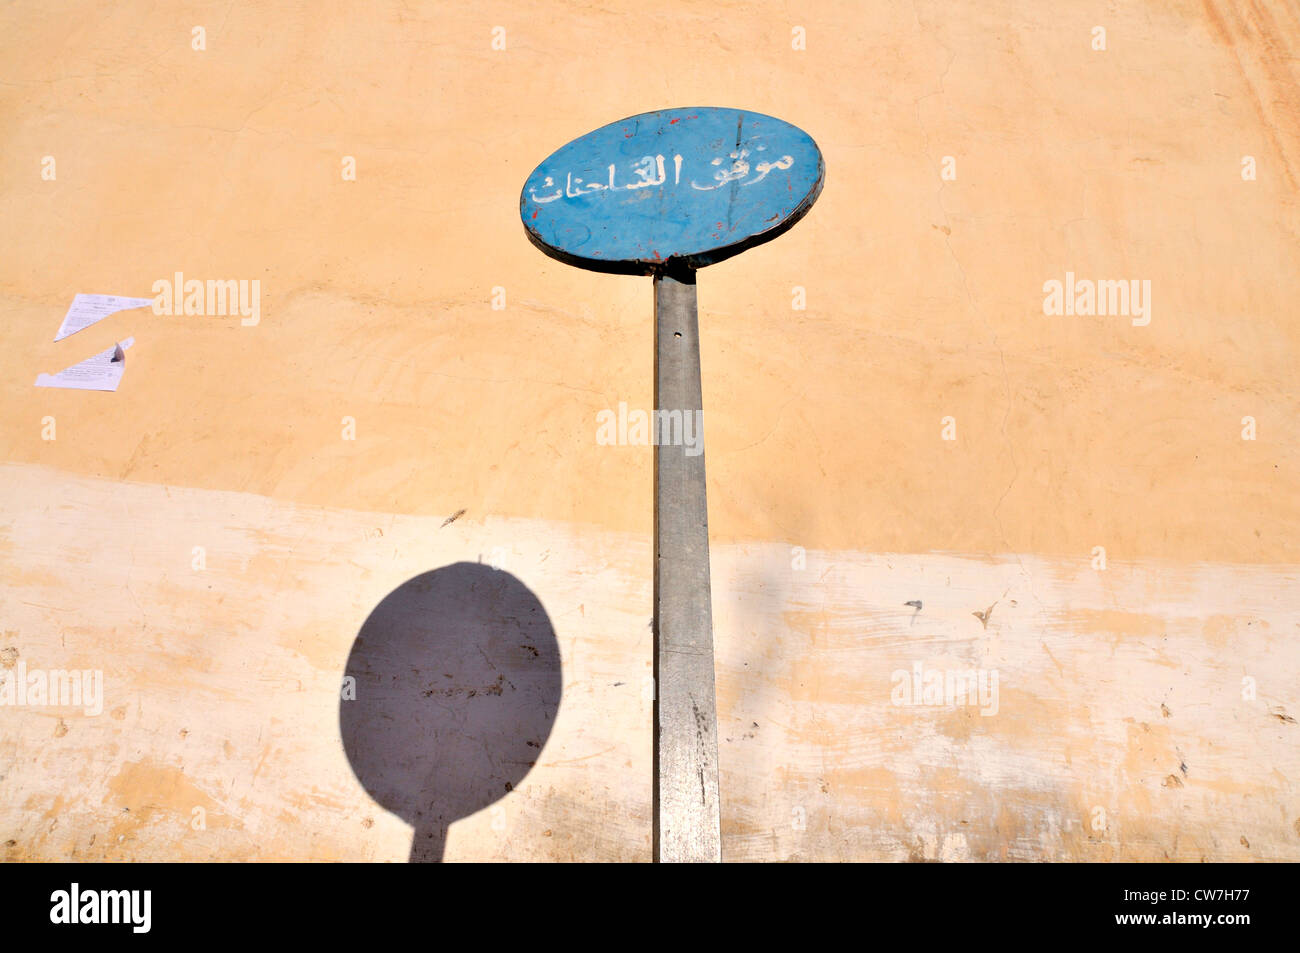 information sign 'chargeable parking area', Morocco, Marrakesh Stock Photo